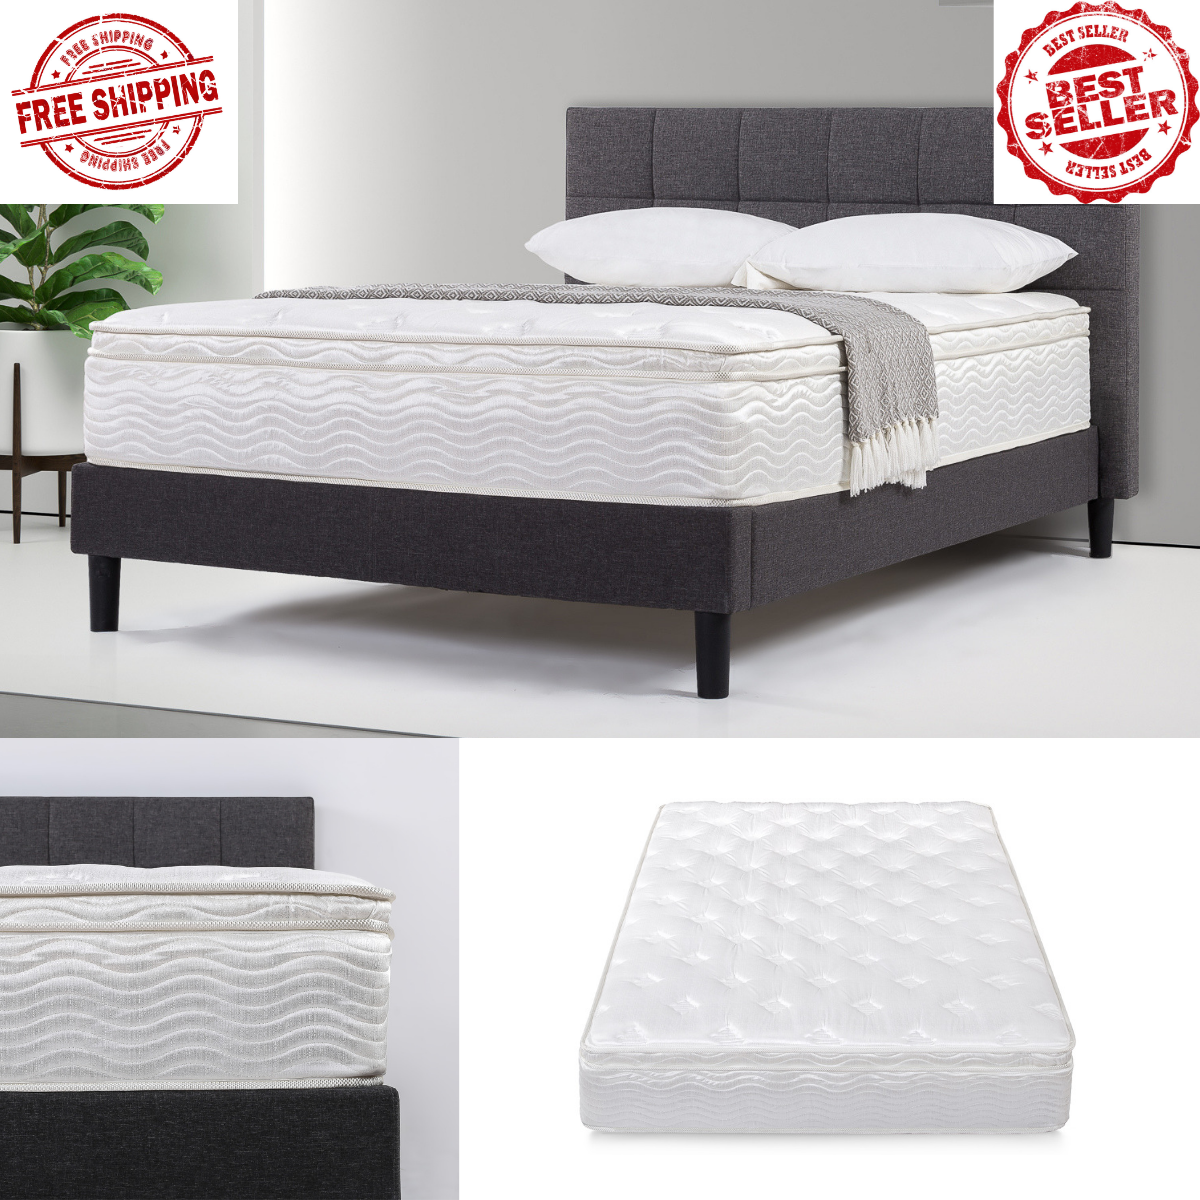 Twin Full Queen King Size Spring, Mattress Firm Full Bed Frame